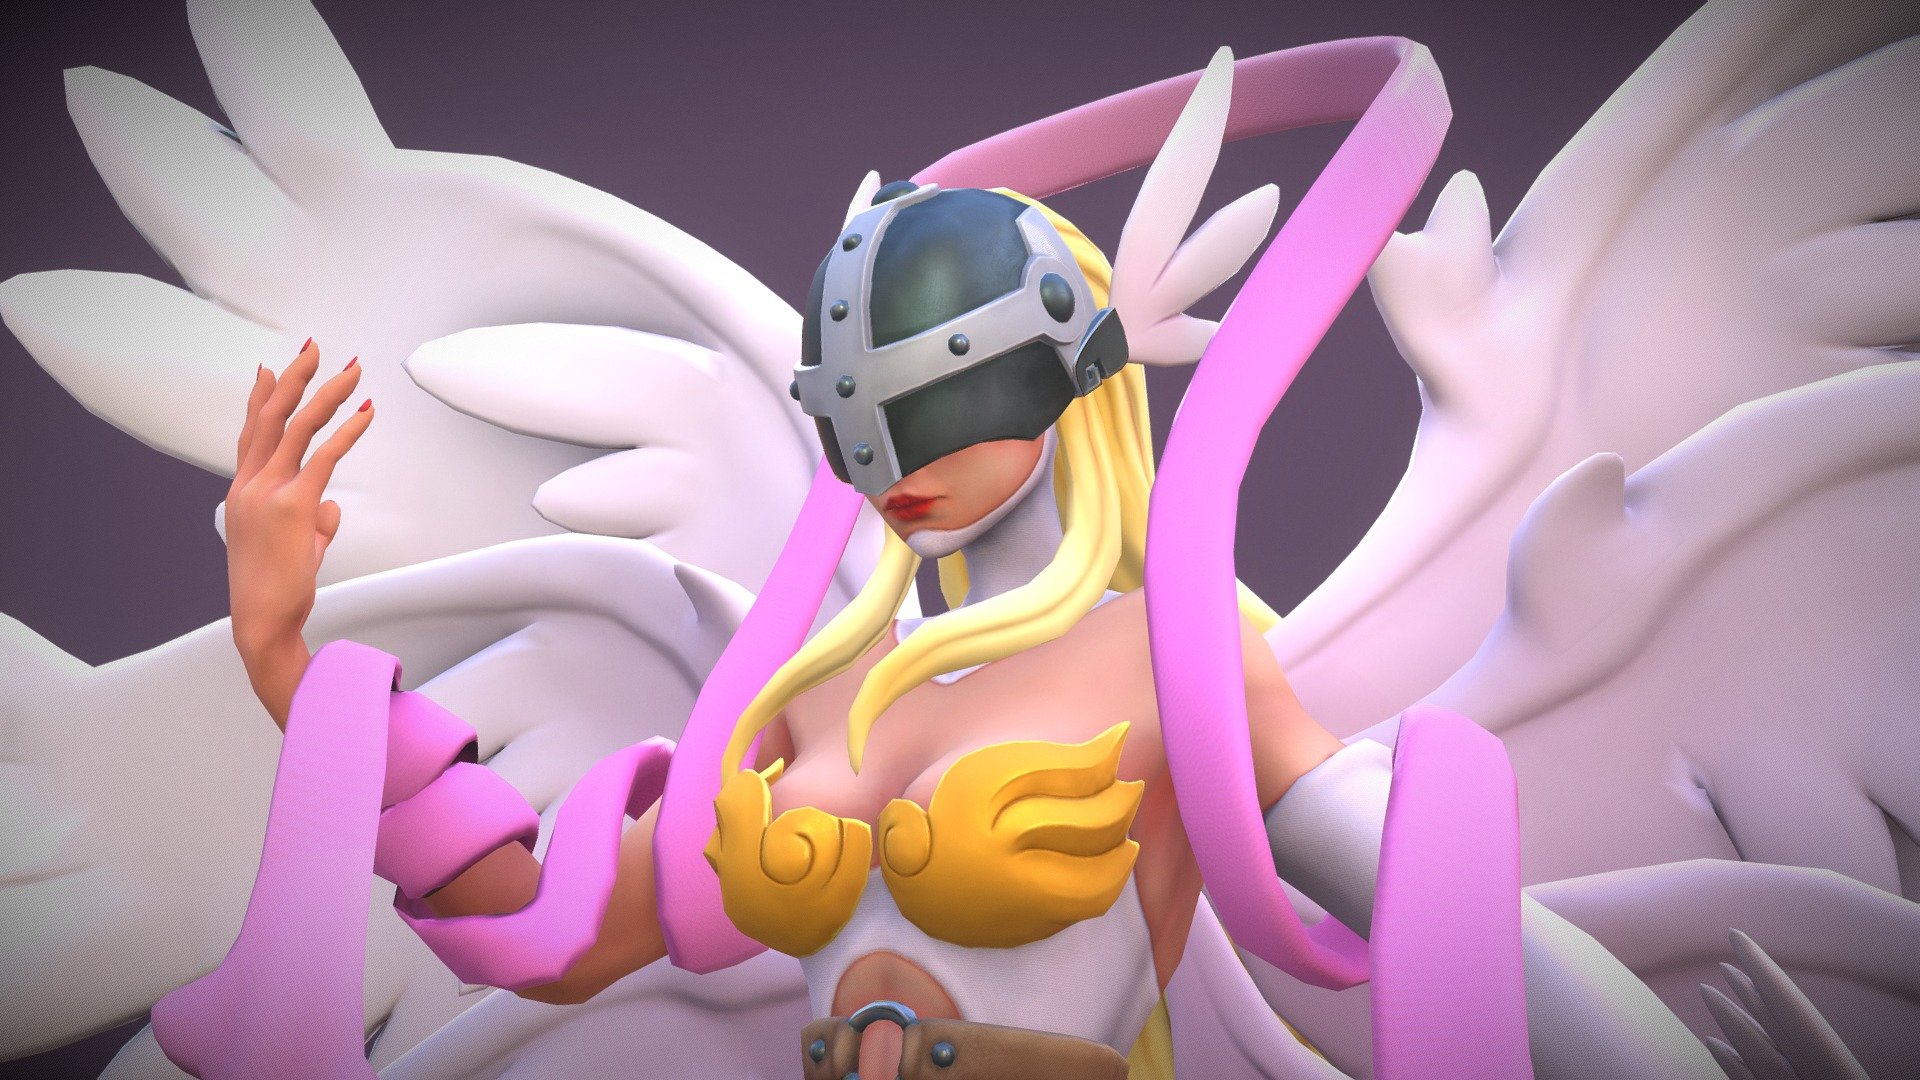 Angewomon FanArt.
Created by Zbrush &amp; Blender, texture by Substance Painter &amp; Photoshop.

Follow my profile :




instagram.com/menglow90 

artstation.com/menglow

https://www.artstation.com/artwork/nQA8Go - Angewomon - 3D model by menglow 3d model